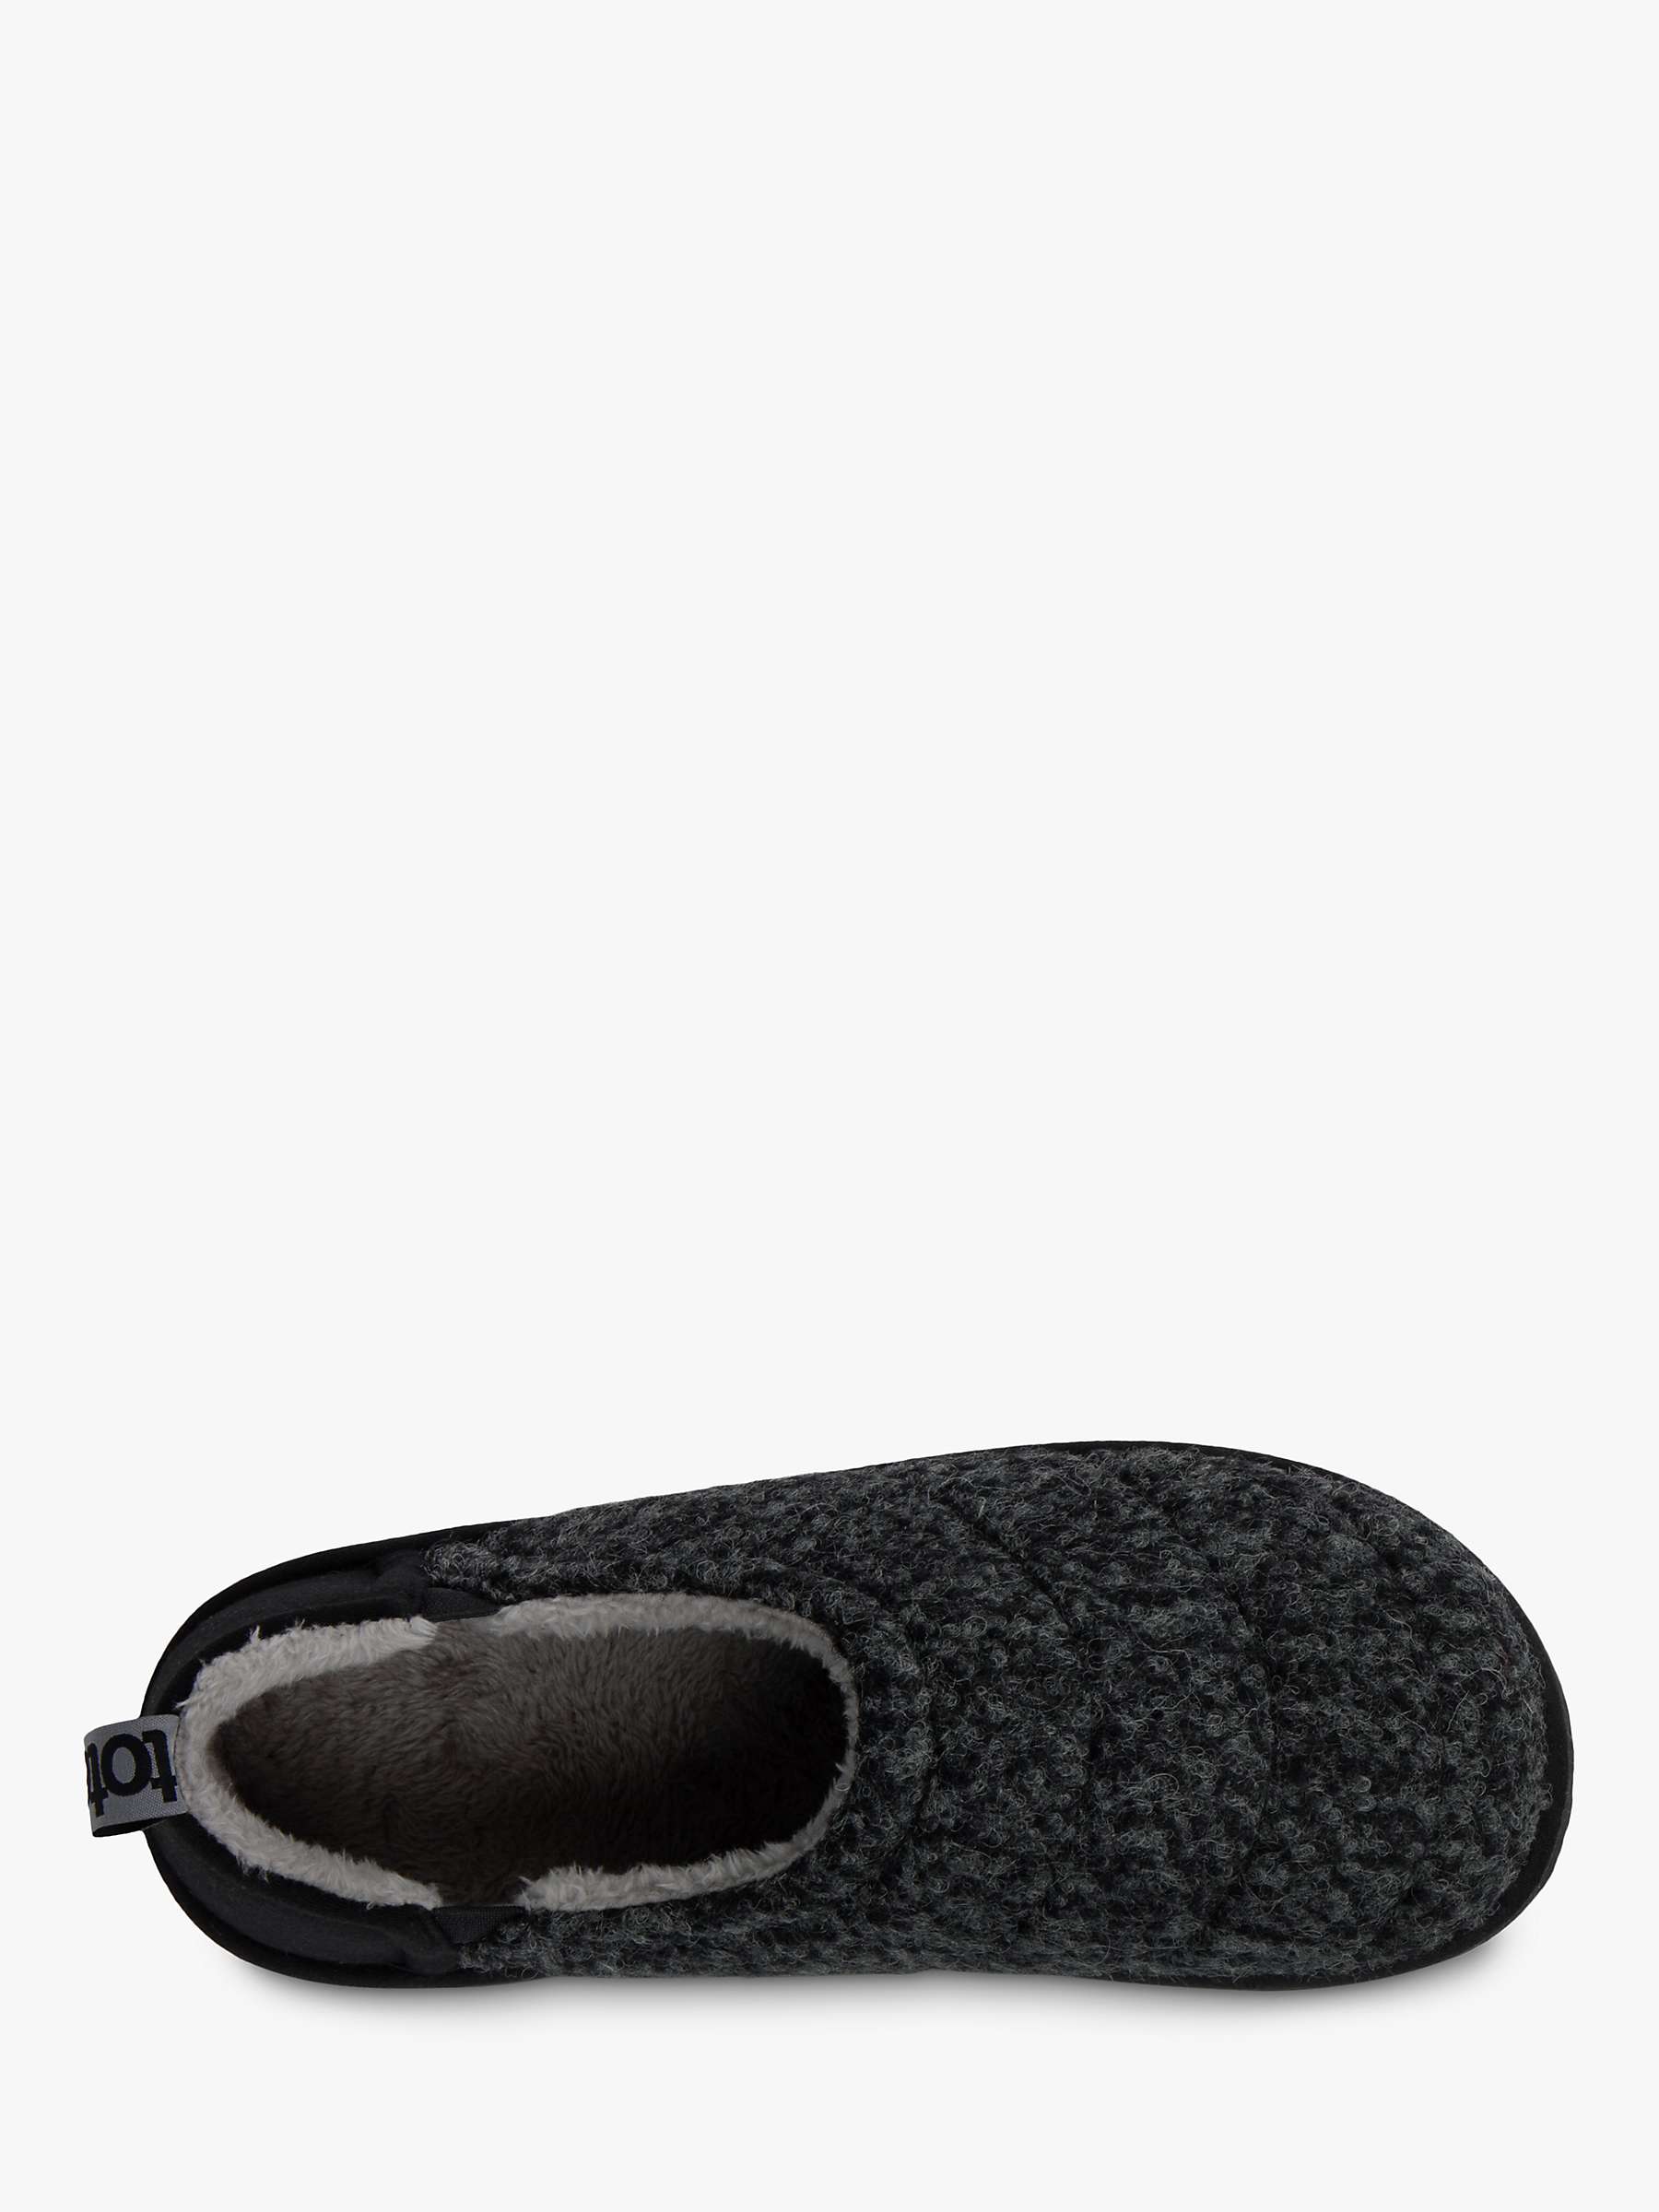 Buy totes Quilted Full Back Slippers, Black Online at johnlewis.com